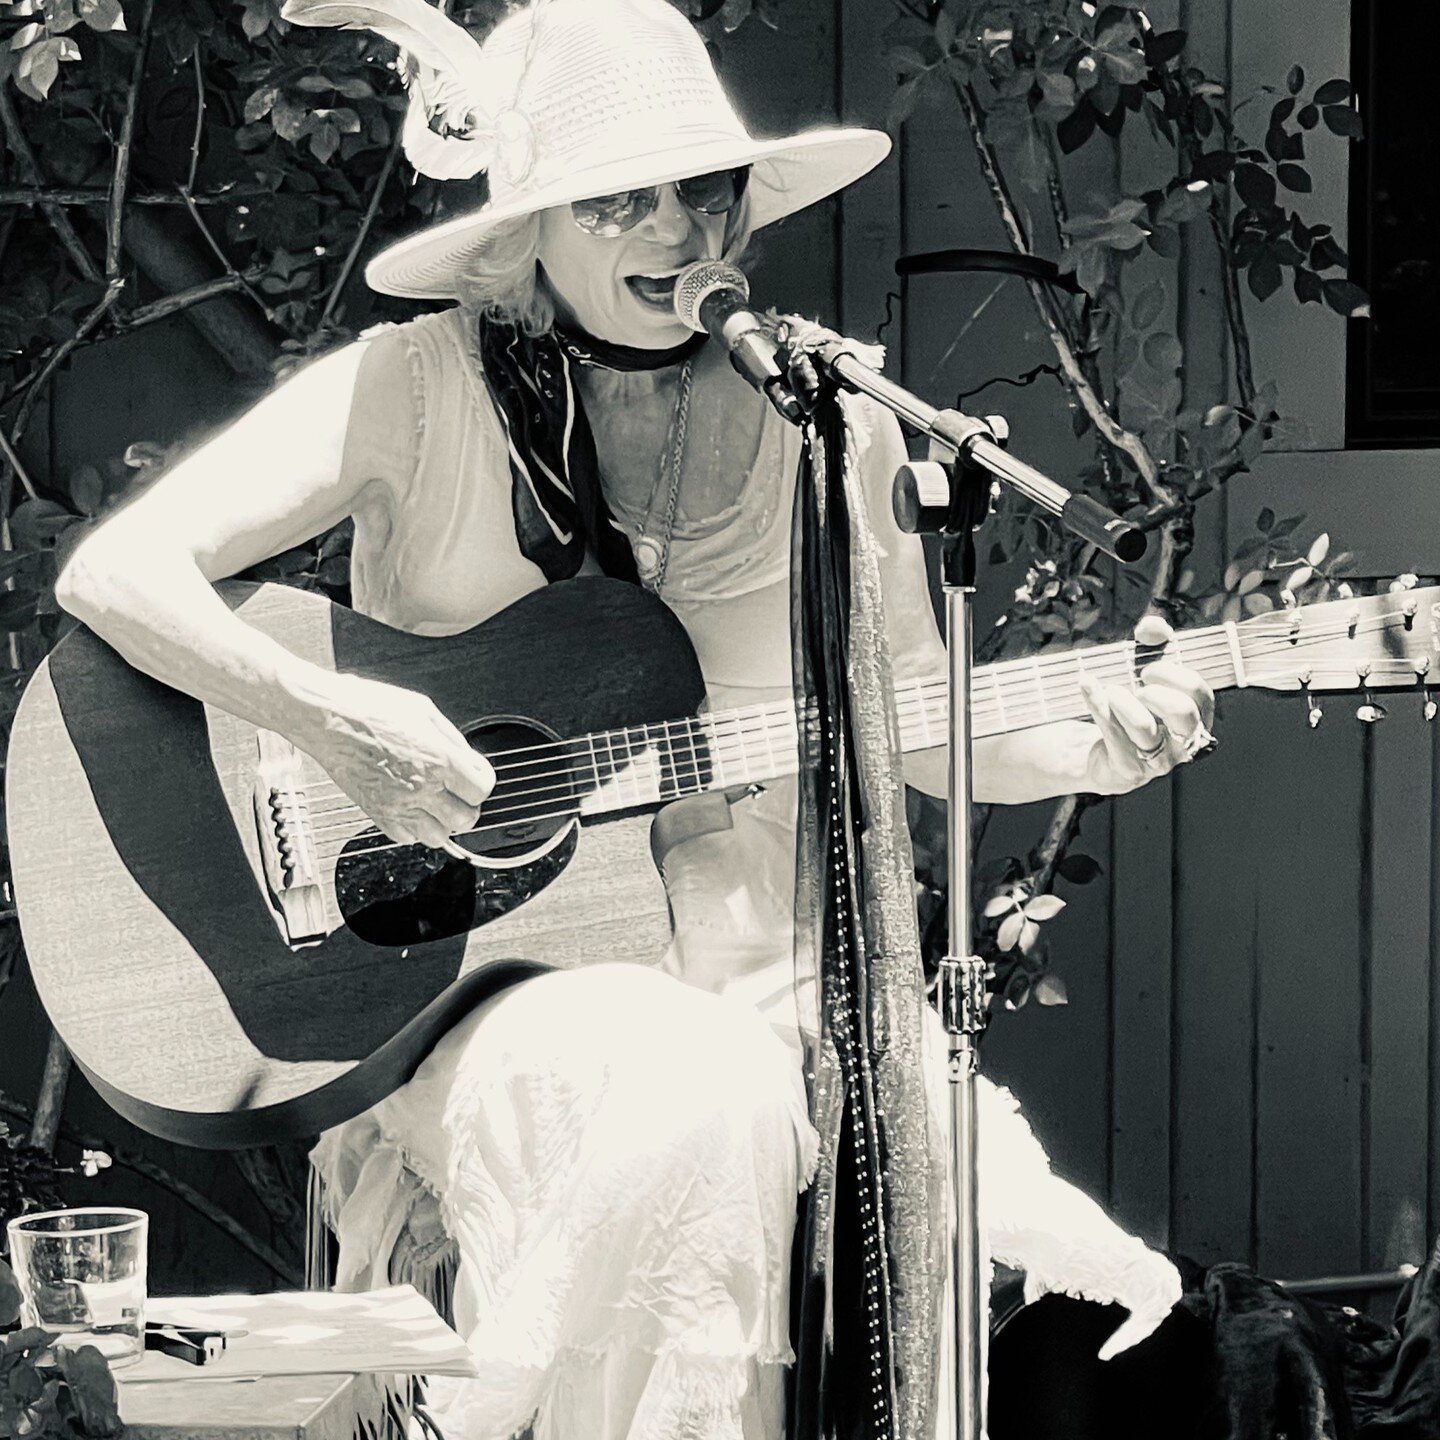 Playing Saturday, June 11 from 1:30-4:30 at Wrath Wines in Soledad. For more info
https://www.koriwines.com/
#livemusic #singersongwriter #wrathwines#koriwines#livemusic#wineandmusic